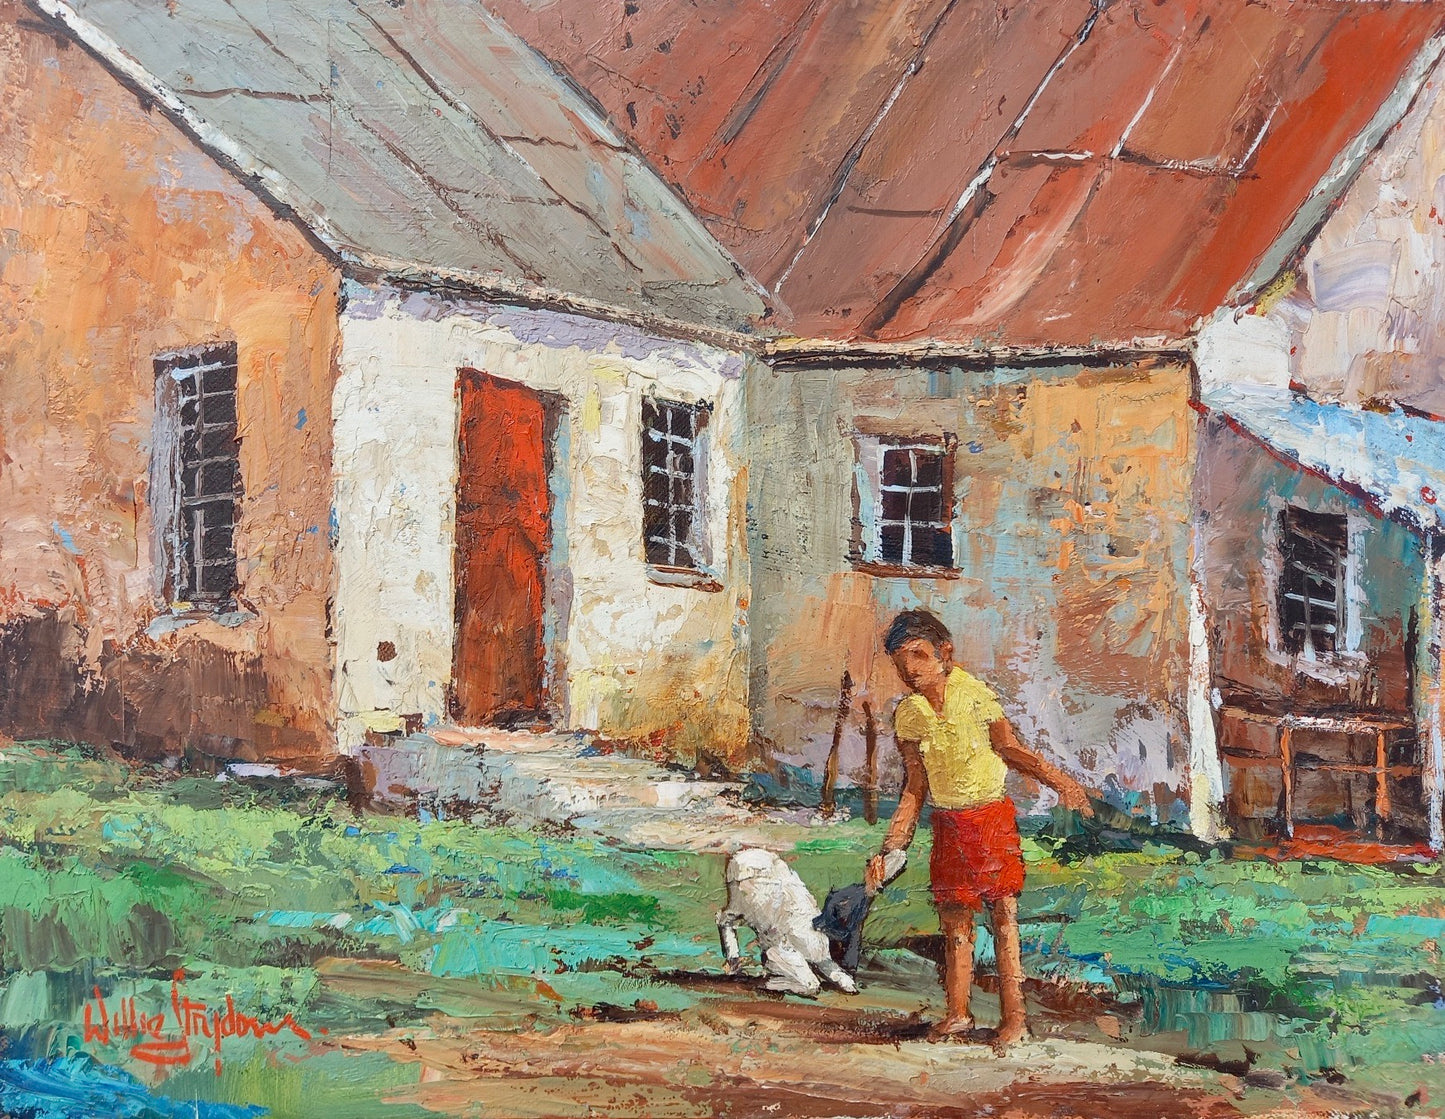 Oil on Canvas Panel by Willie Strydom